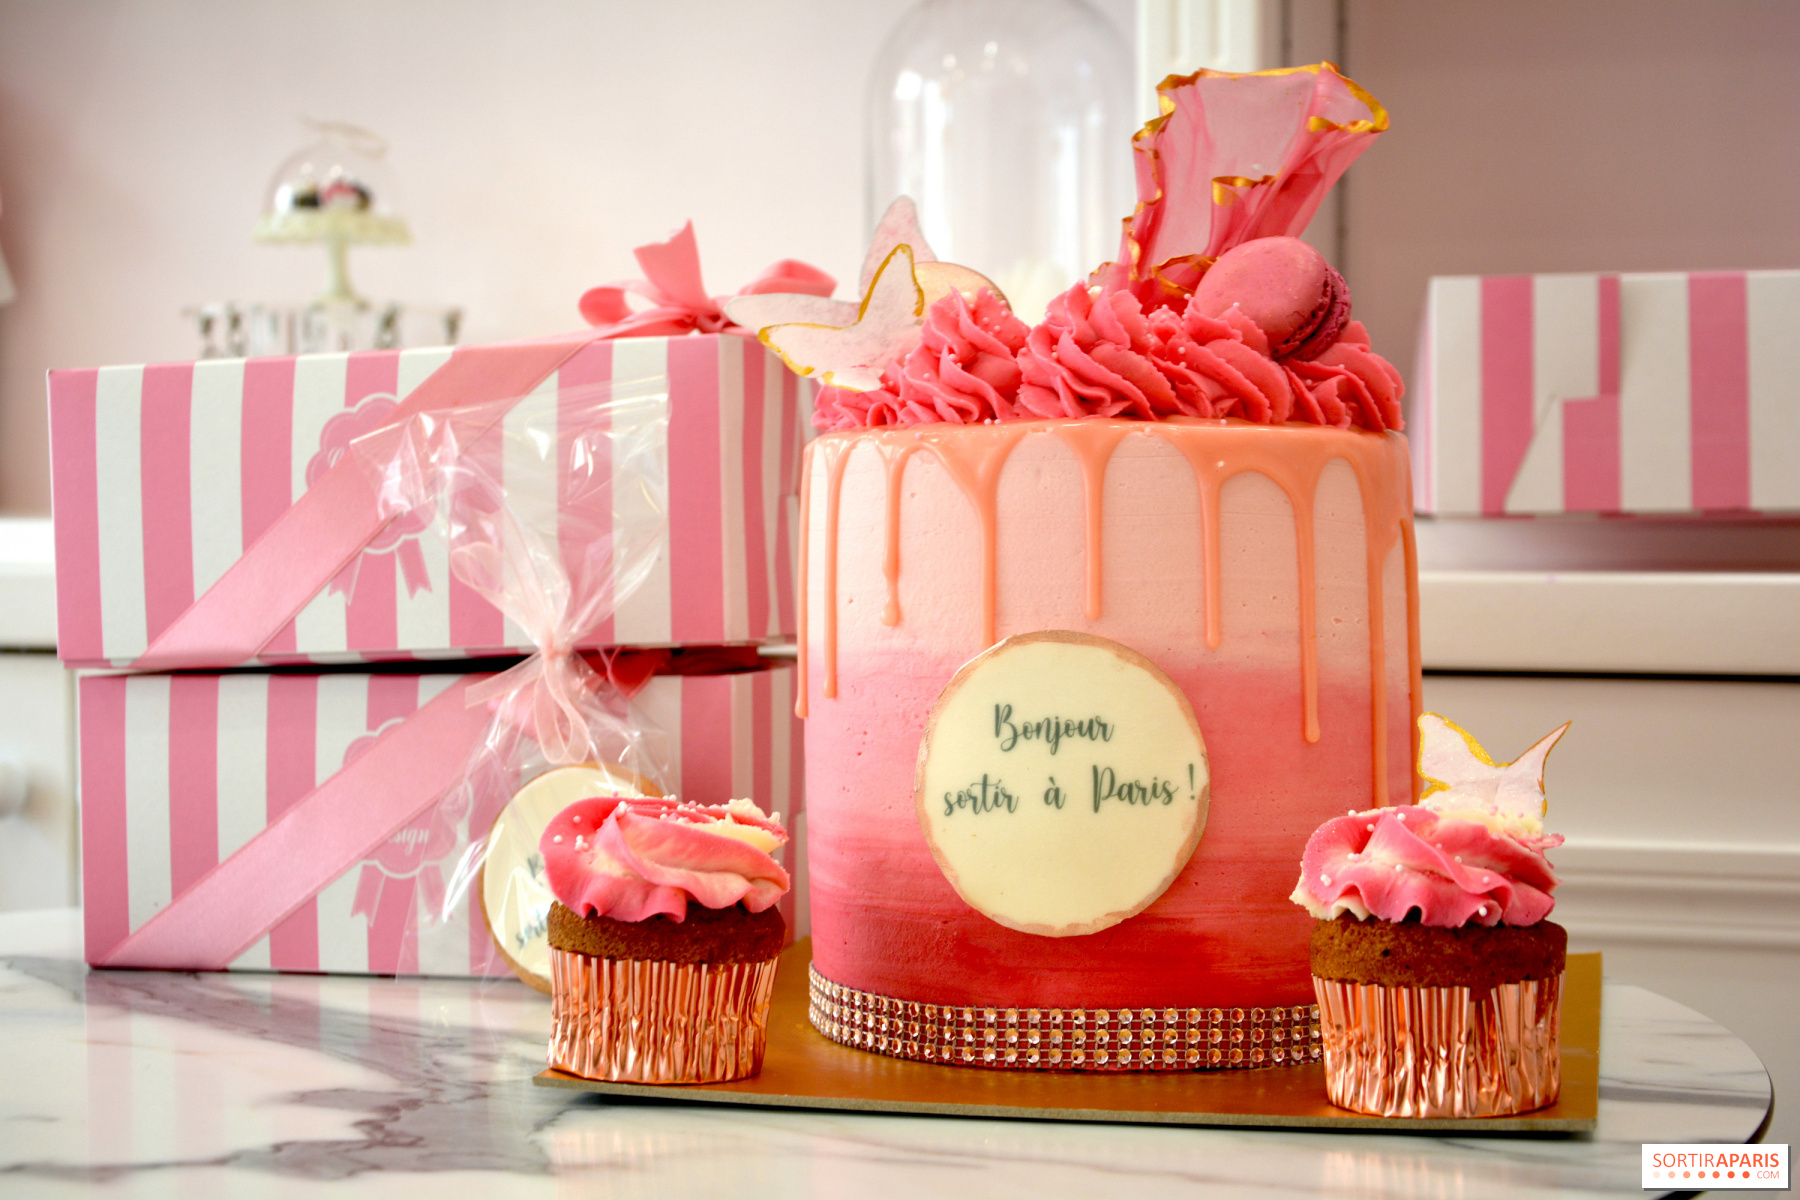 Bachelor Party Cakes Archives - The Makery Cake Co